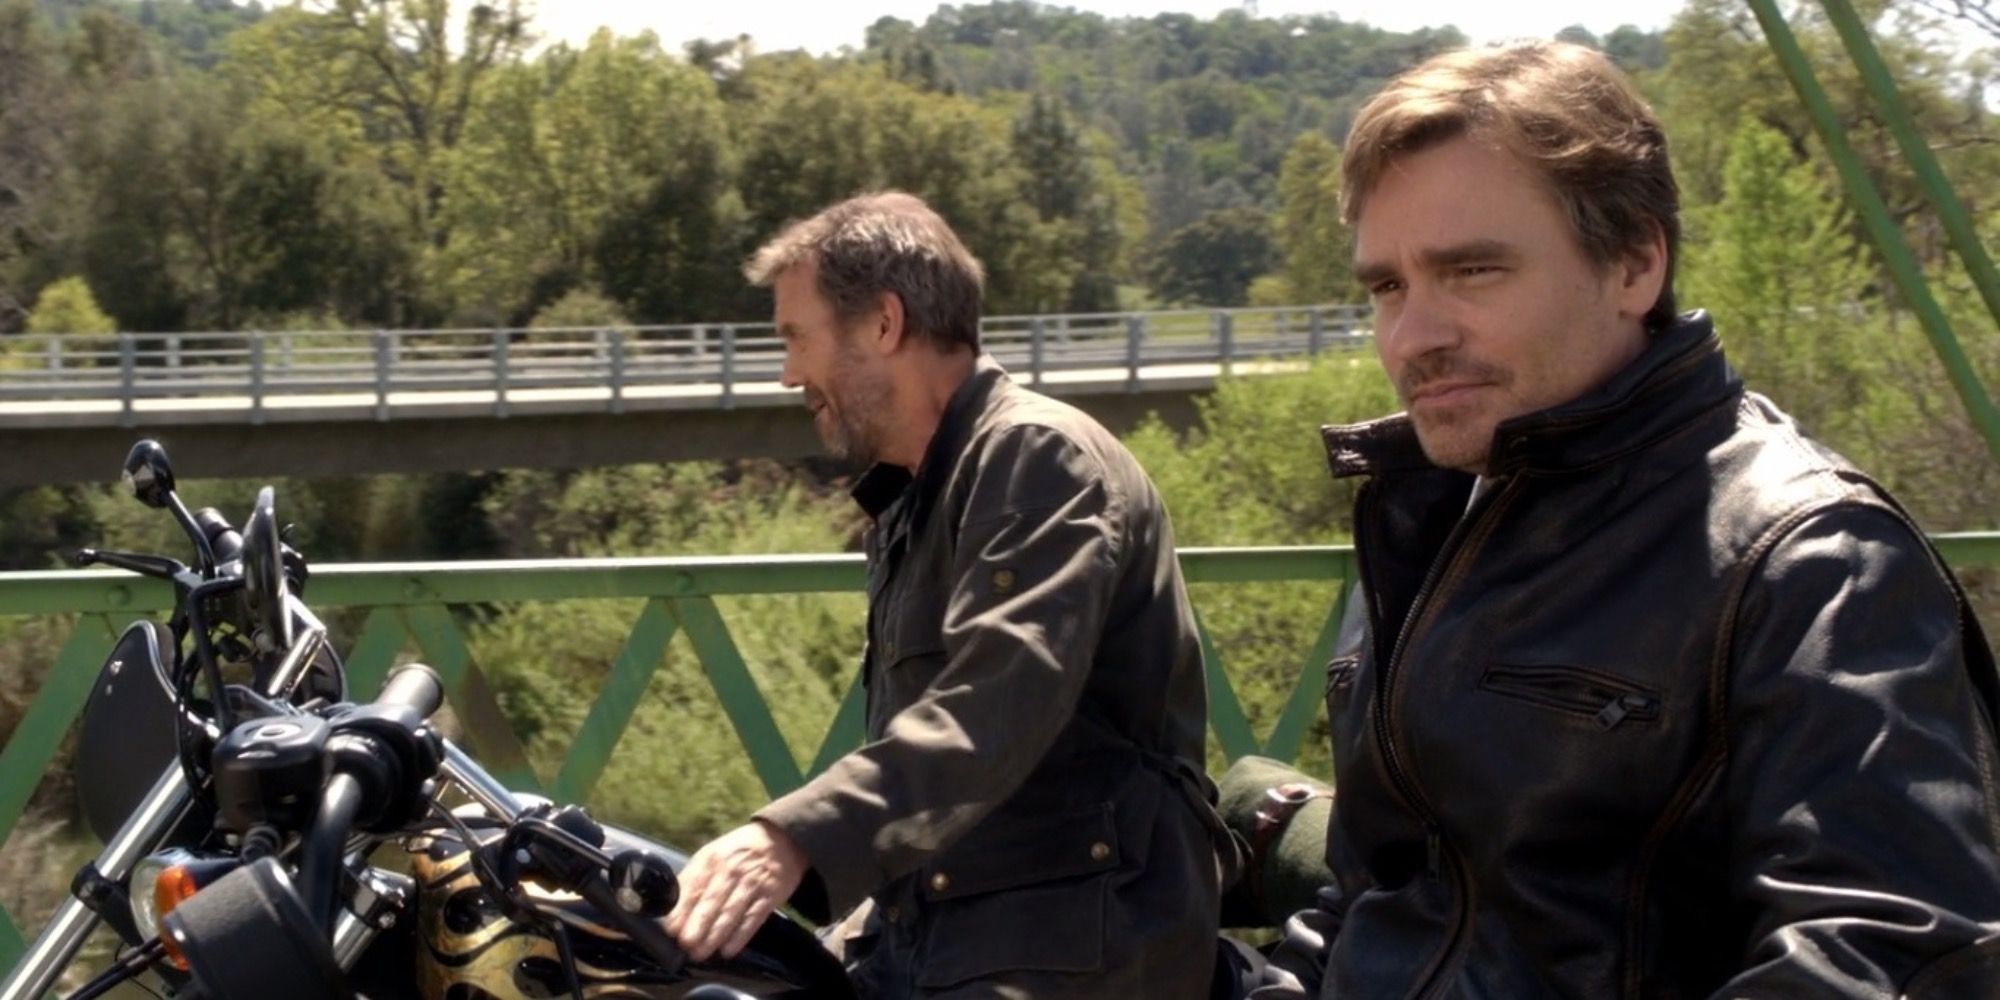 House and Wilson on motorbikes